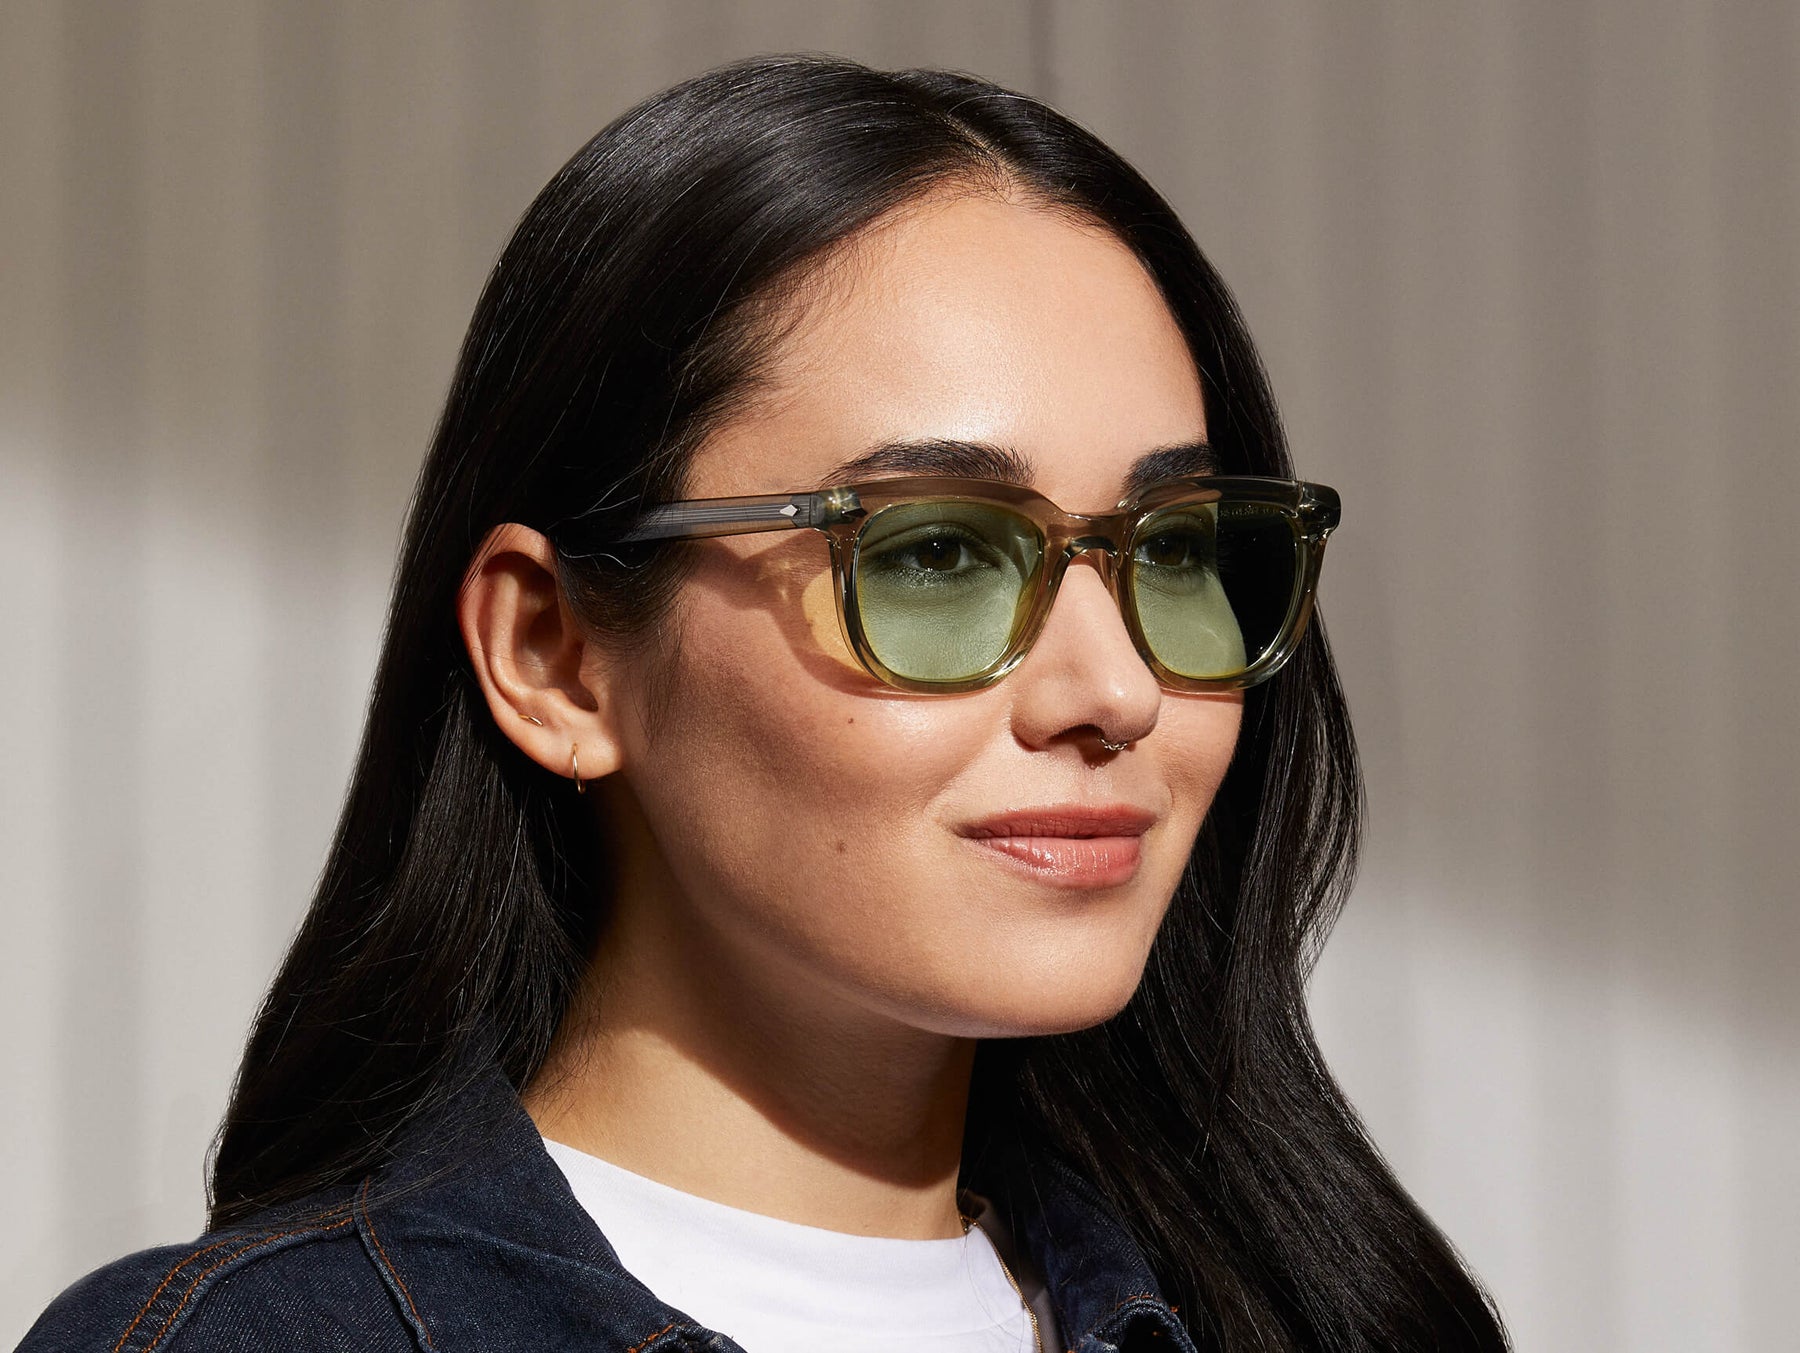 Model is wearing The YONTIF in Sage in size 49 with Limelight Tinted Lenses